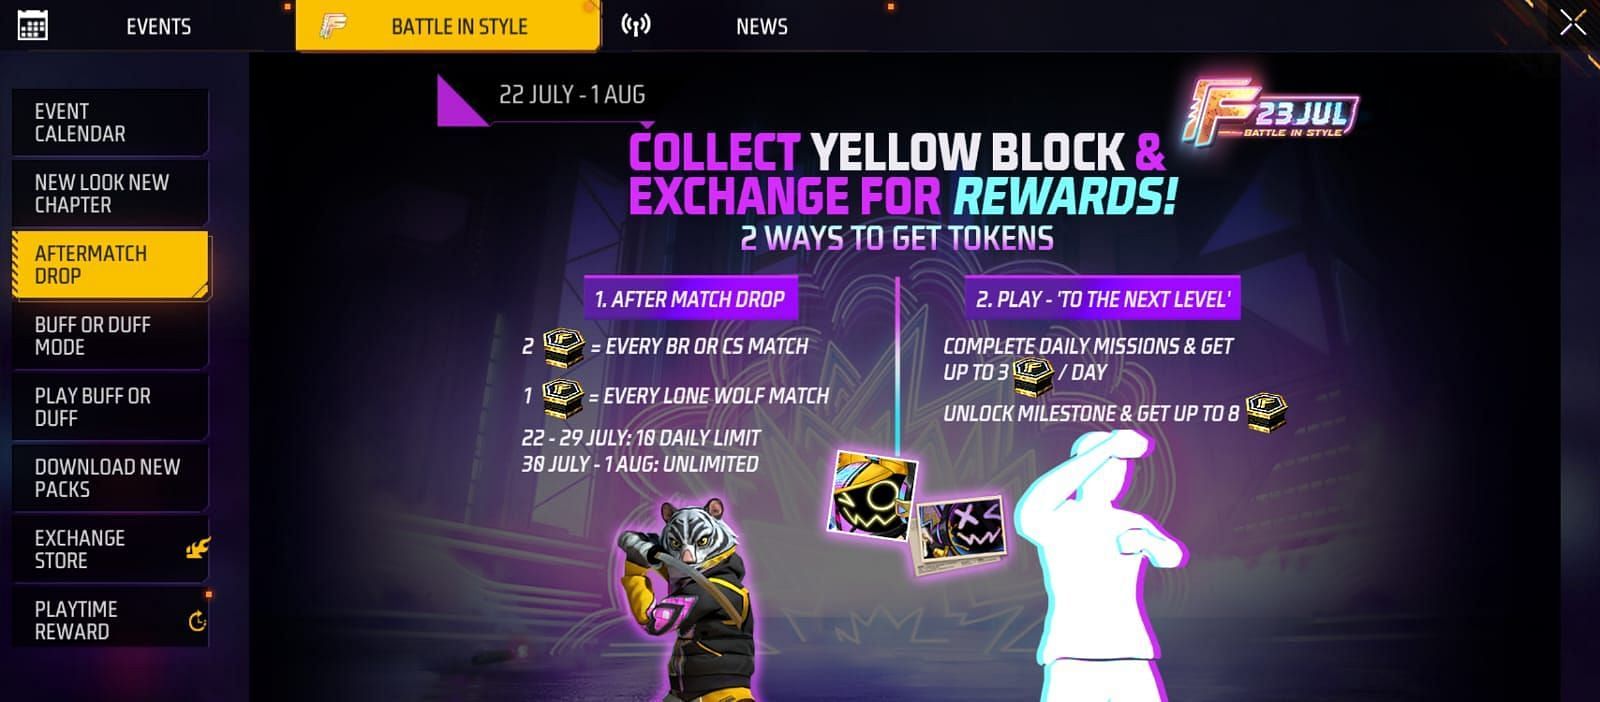 Two methods via which players can collect Yellow Block tokens (Image via Garena)